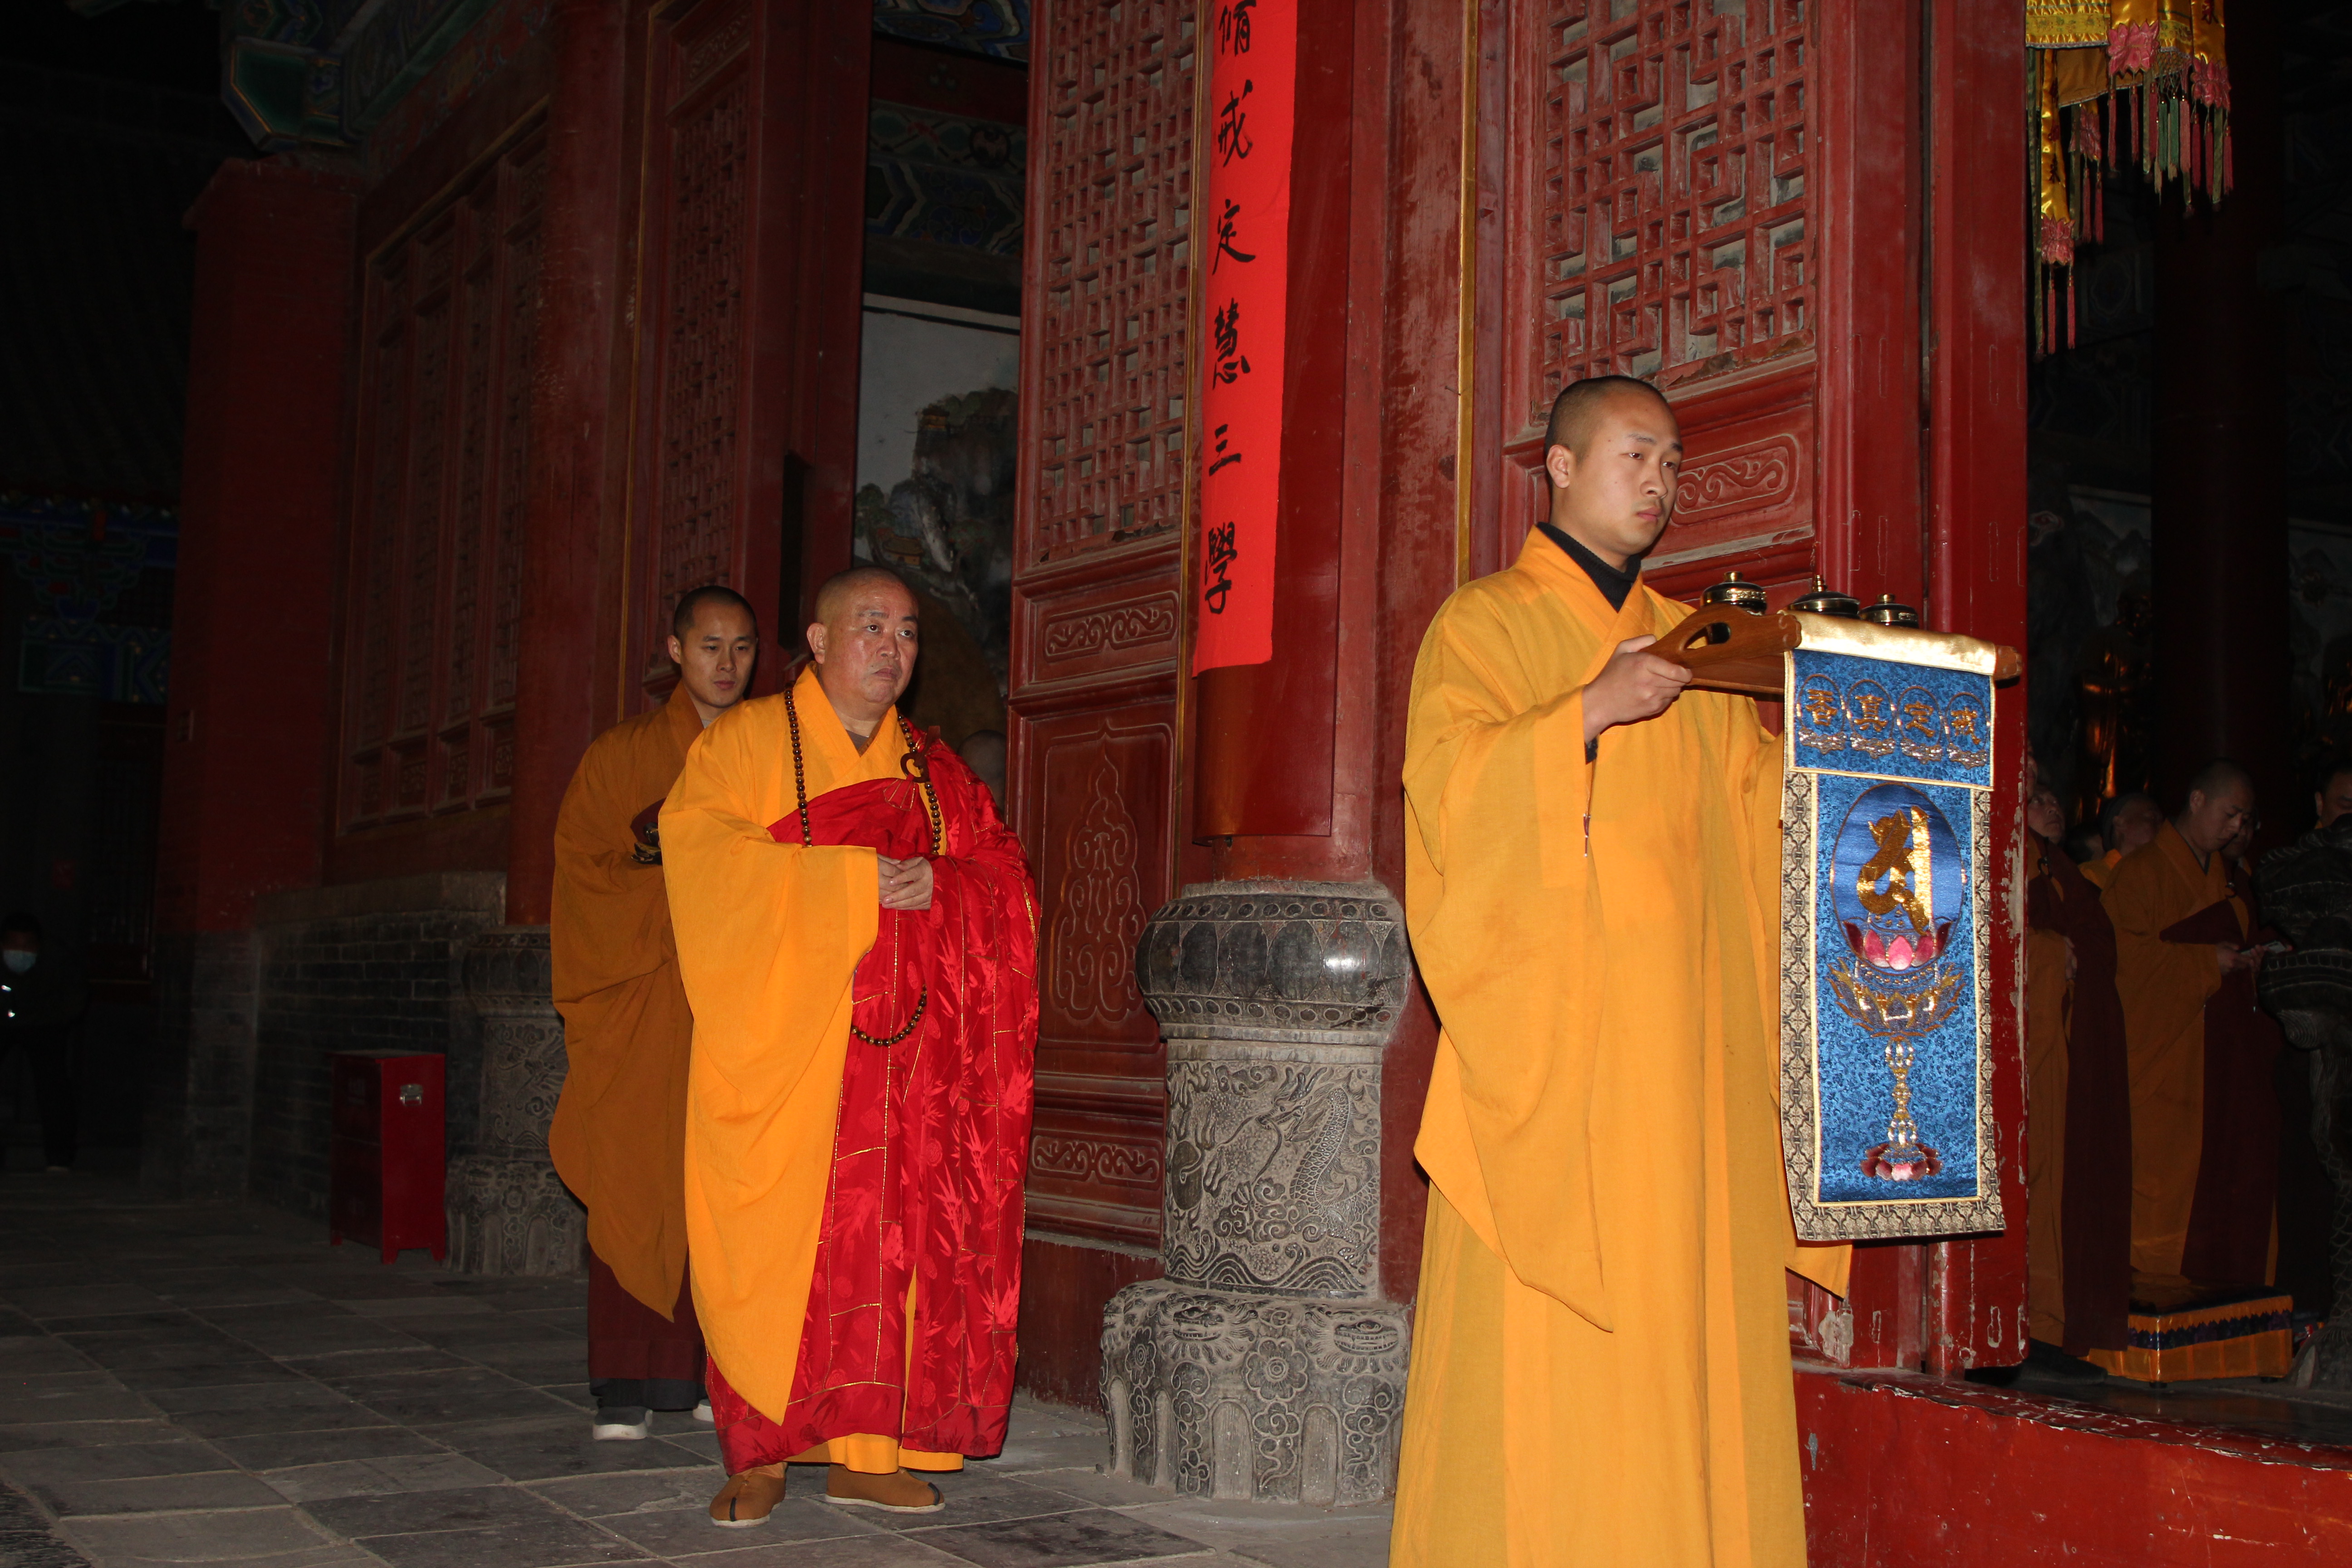 Shaolin Temple Welcomes the New Year